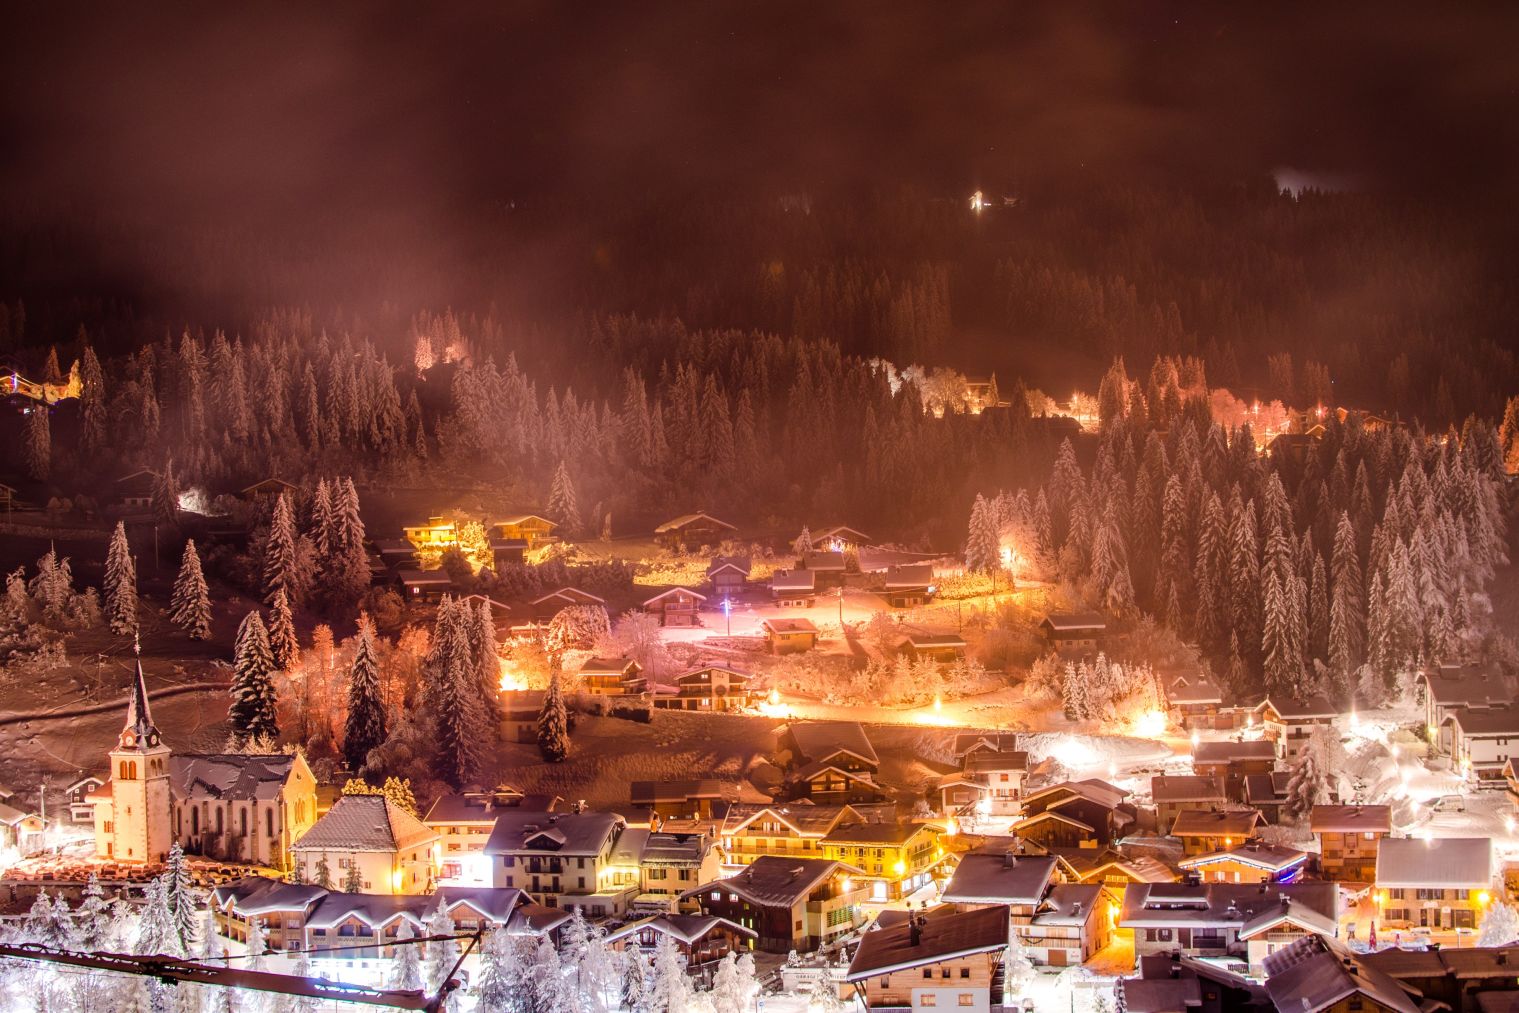 An amazing ski resort in mountains during a Christmas ski holiday 2022